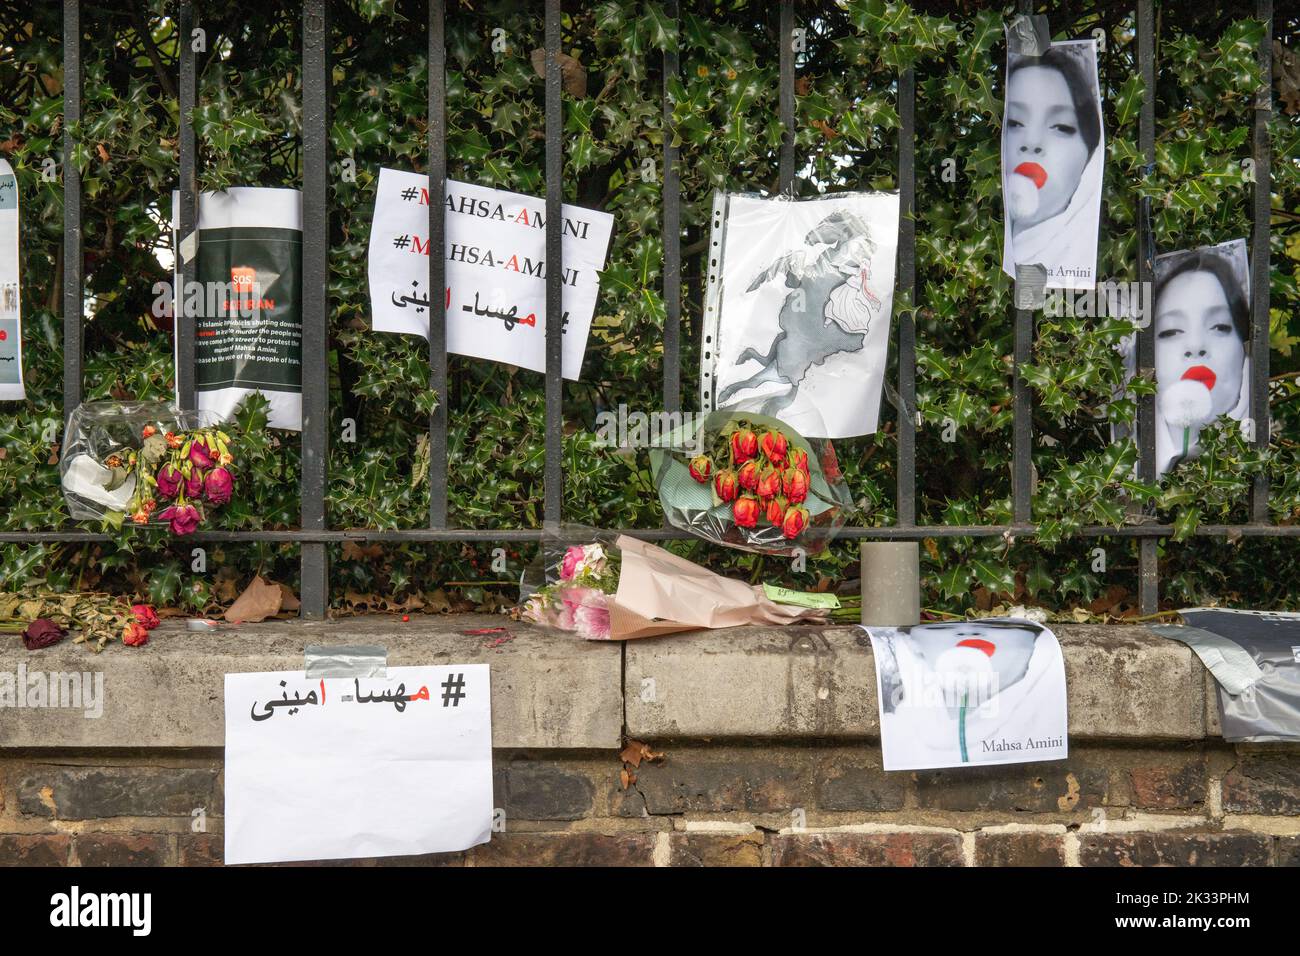 London, England, UK 24/09/2022 Protests continue outside the Iranian Embassy following the death of Mahsa Amini in Iran just over a week ago. Women played a major role in the demonstration calling for democracy and freedom. Stock Photo